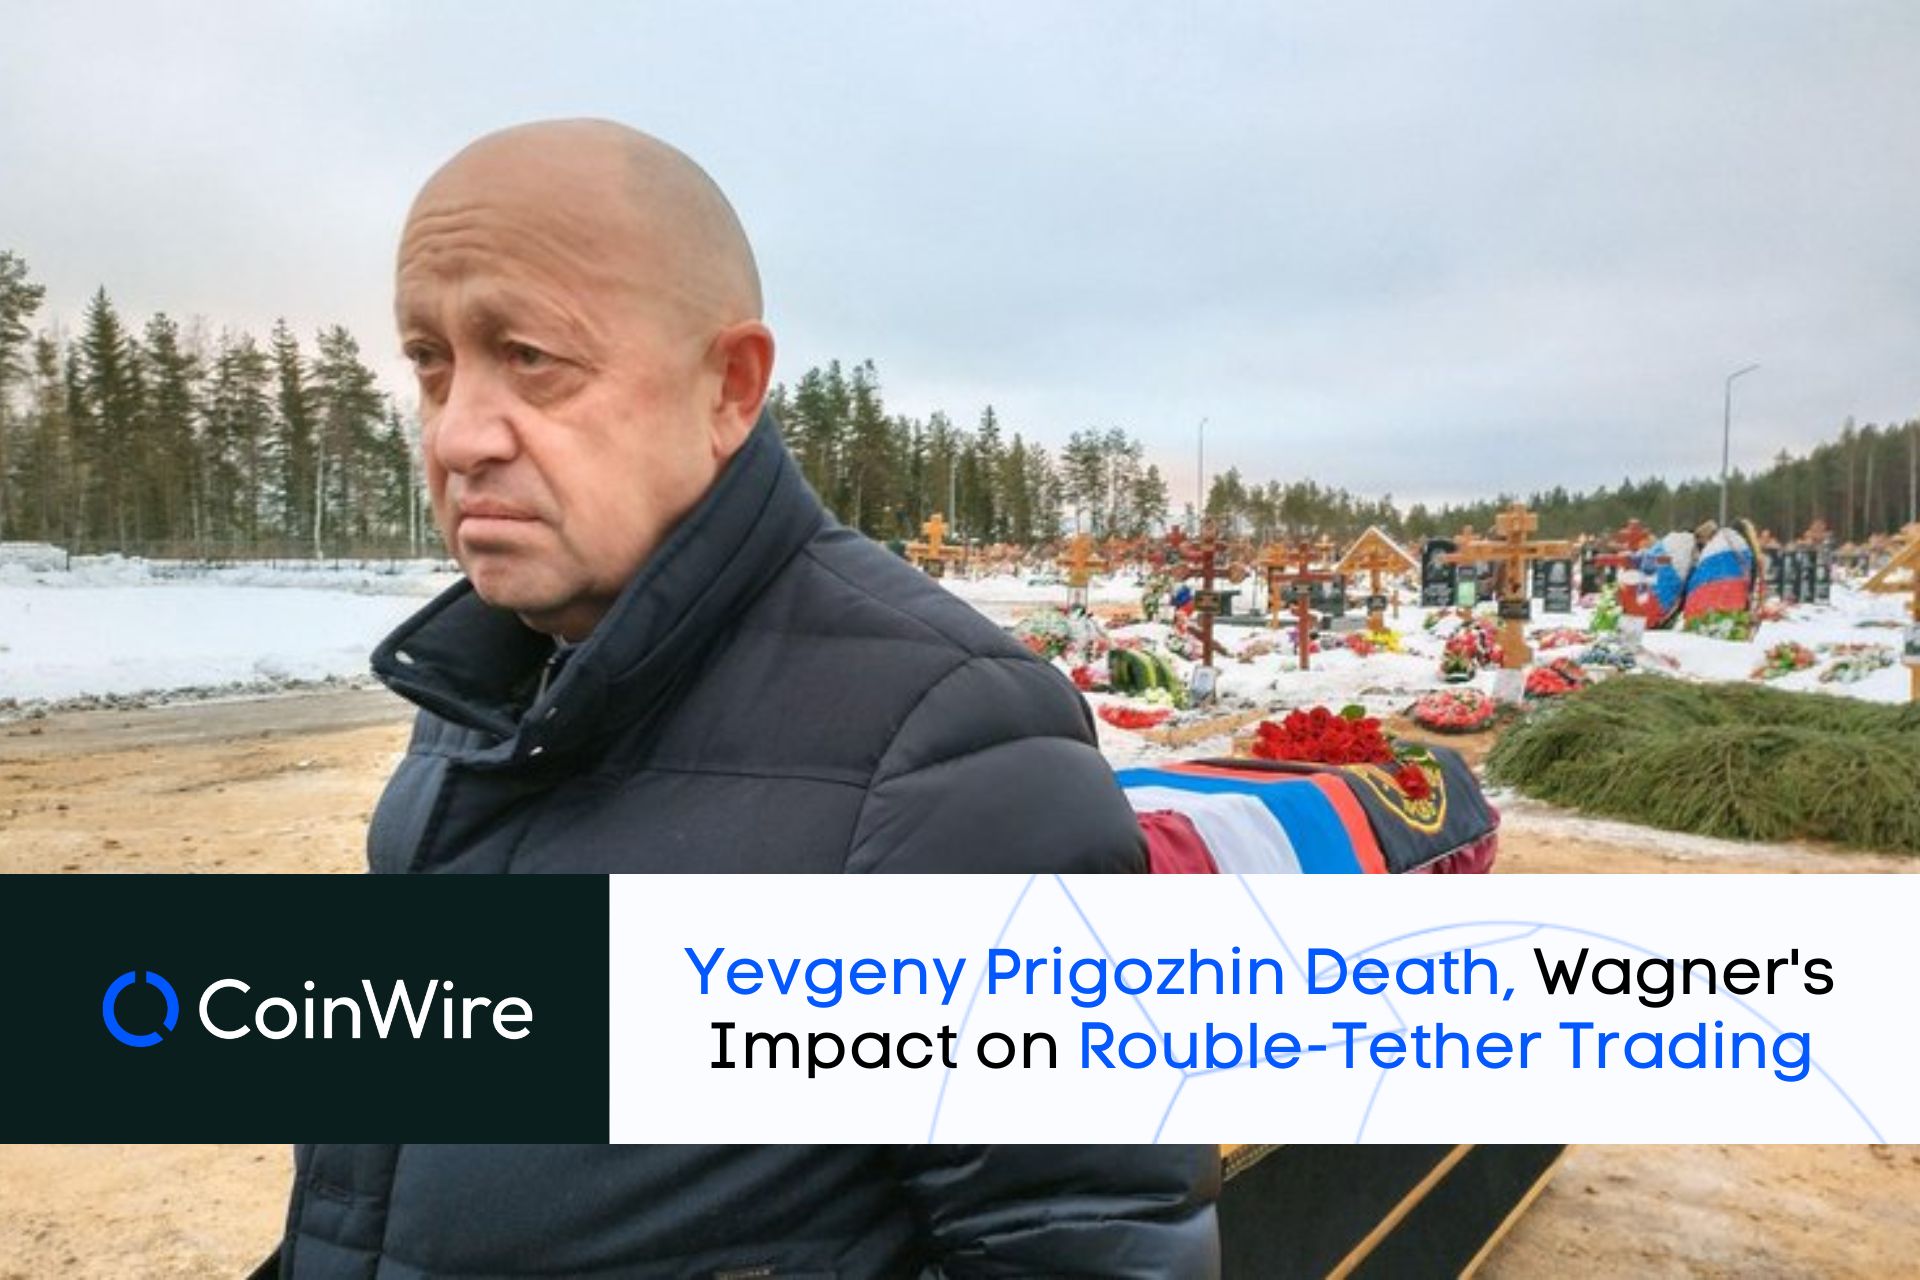 Yevgeny Prigozhin Death, Wagner'S Impact On Rouble-Tether Trading